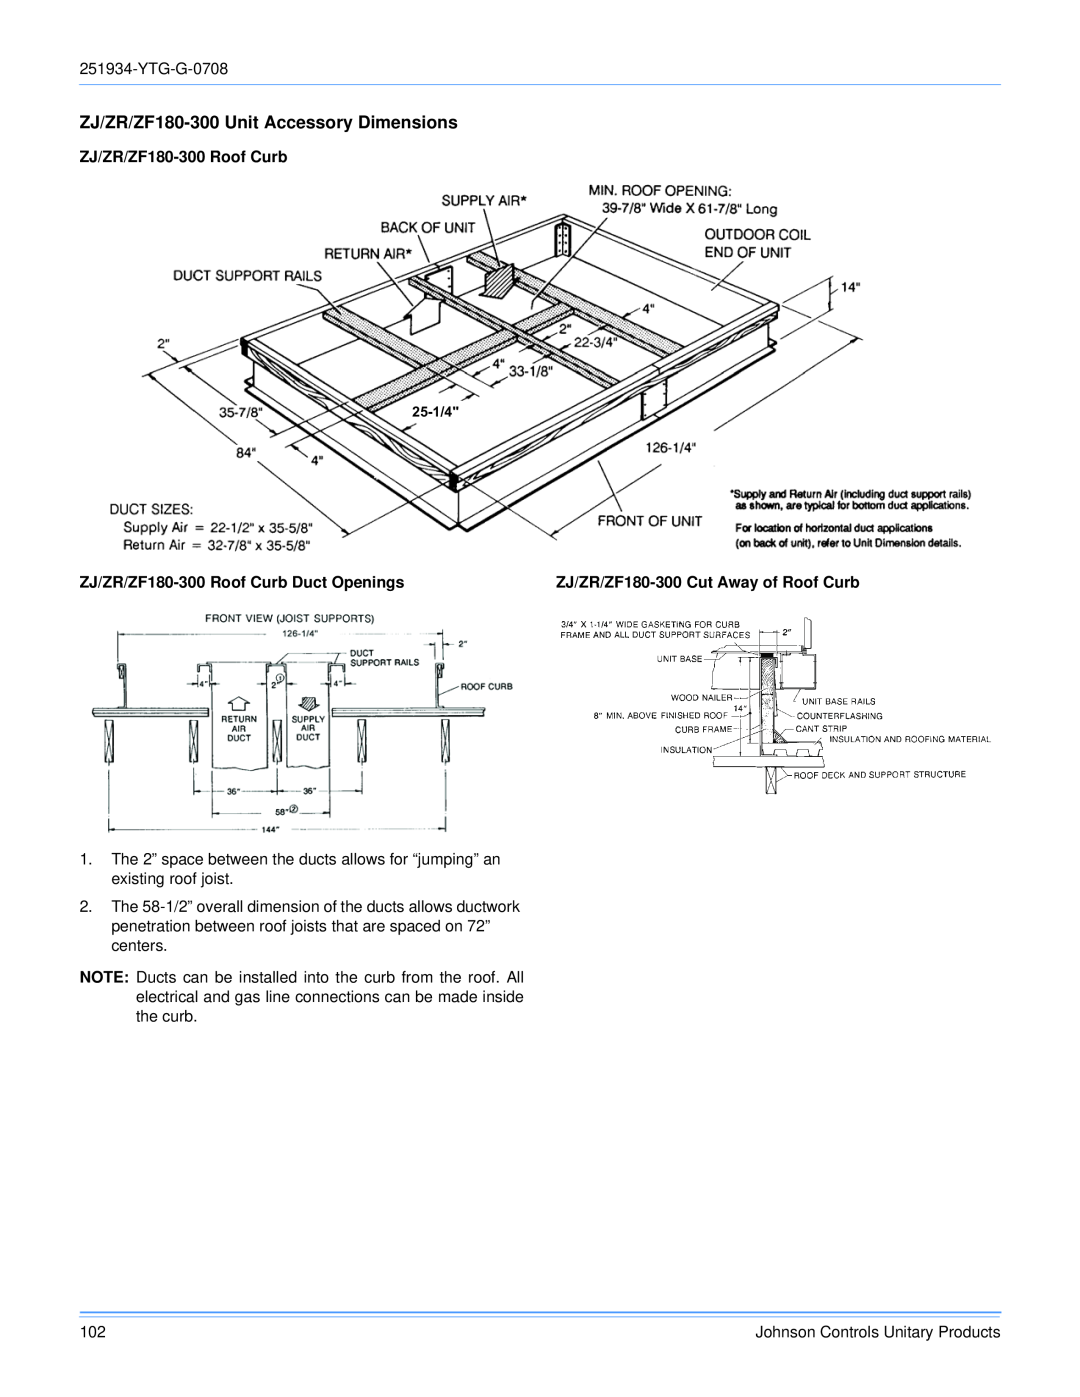 York R-410A manual ZJ/ZR/ZF180-300Unit Accessory Dimensions, ZJ/ZR/ZF180-300Roof Curb Duct Openings 